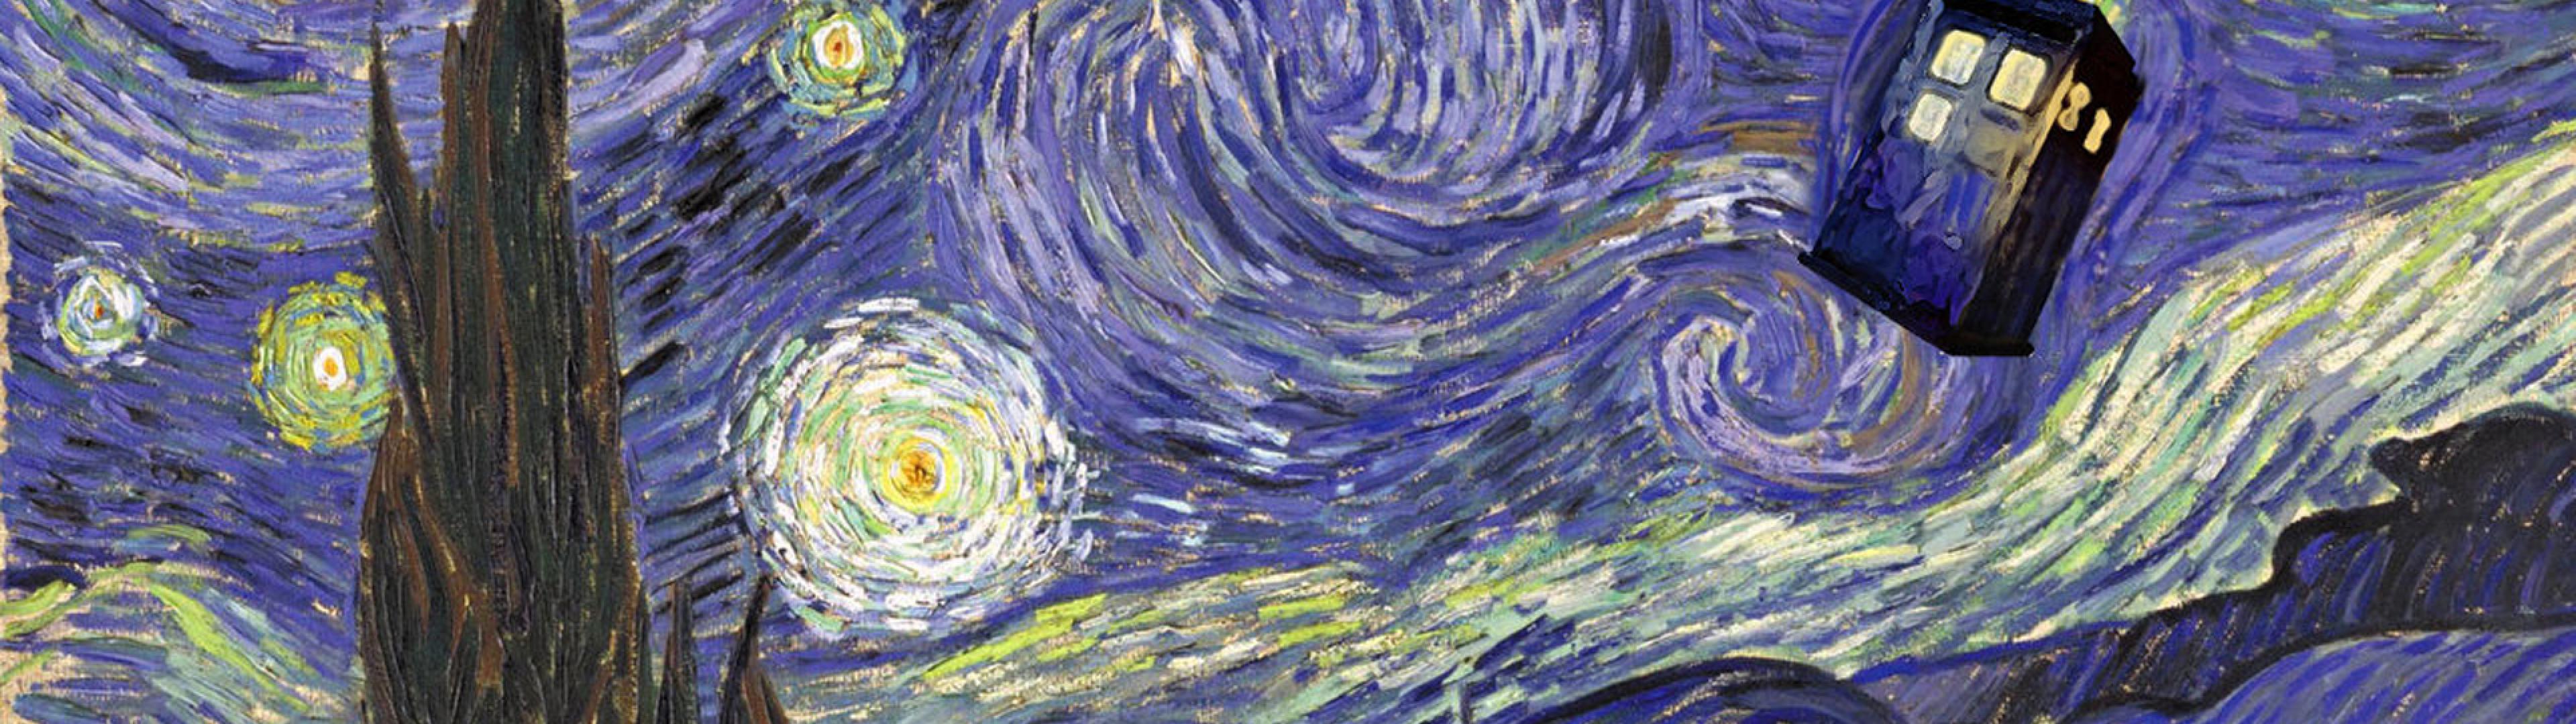 Doctor Who Starry Night Tardis Vincent Van Gogh Ultra Or Dual High